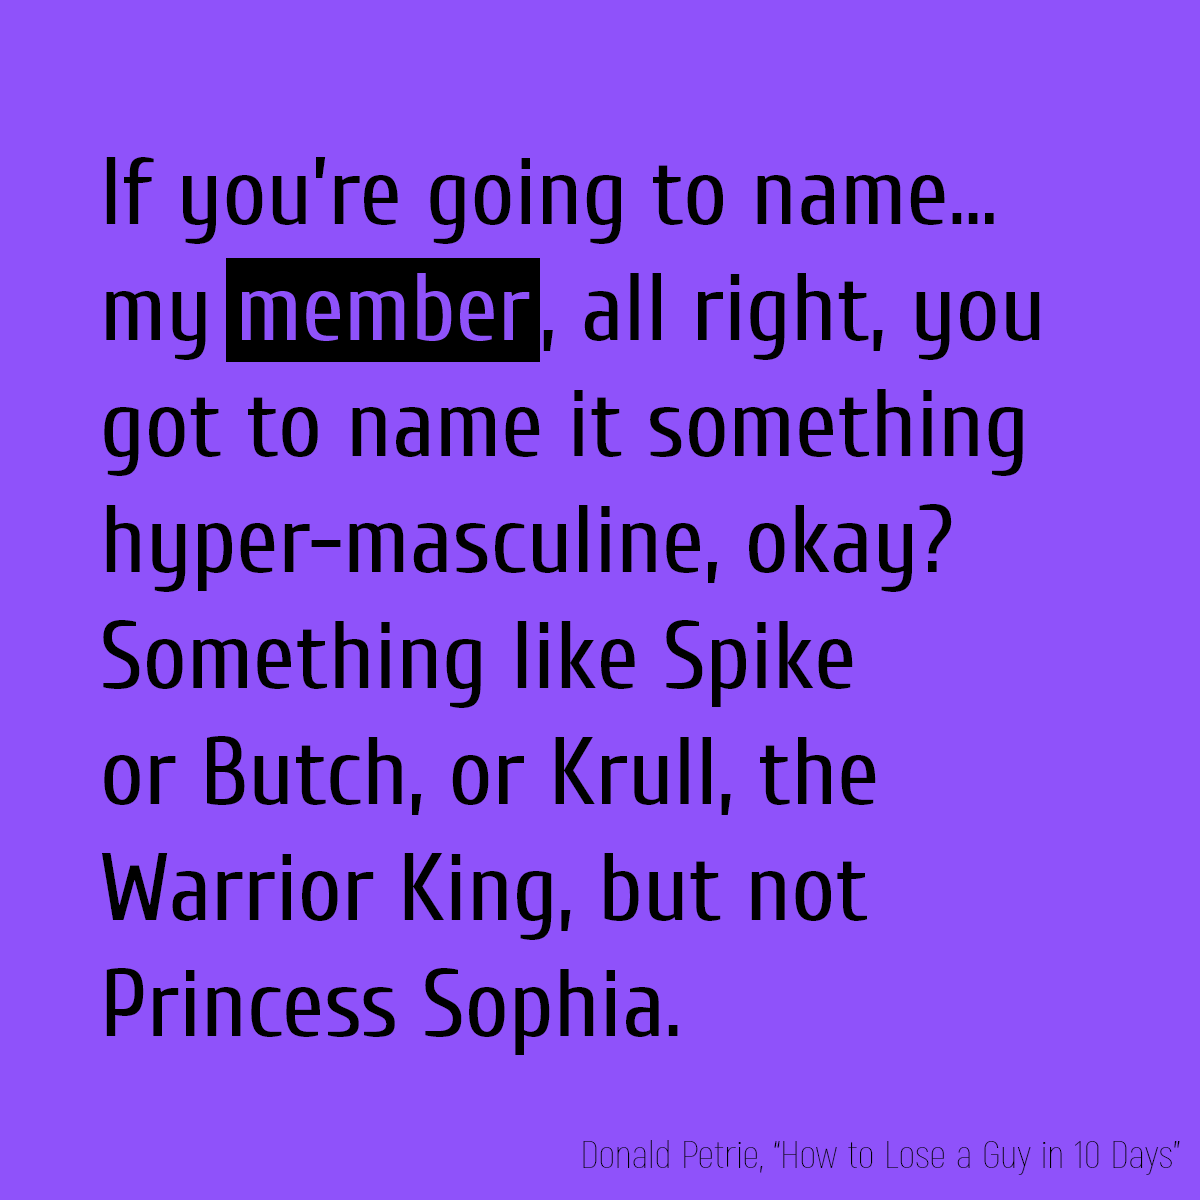 If you’re going to name... my **member**, all right, you got to name it something hyper-masculine, okay? Something like Spike or Butch, or Krull, the Warrior King, but not Princess Sophia.